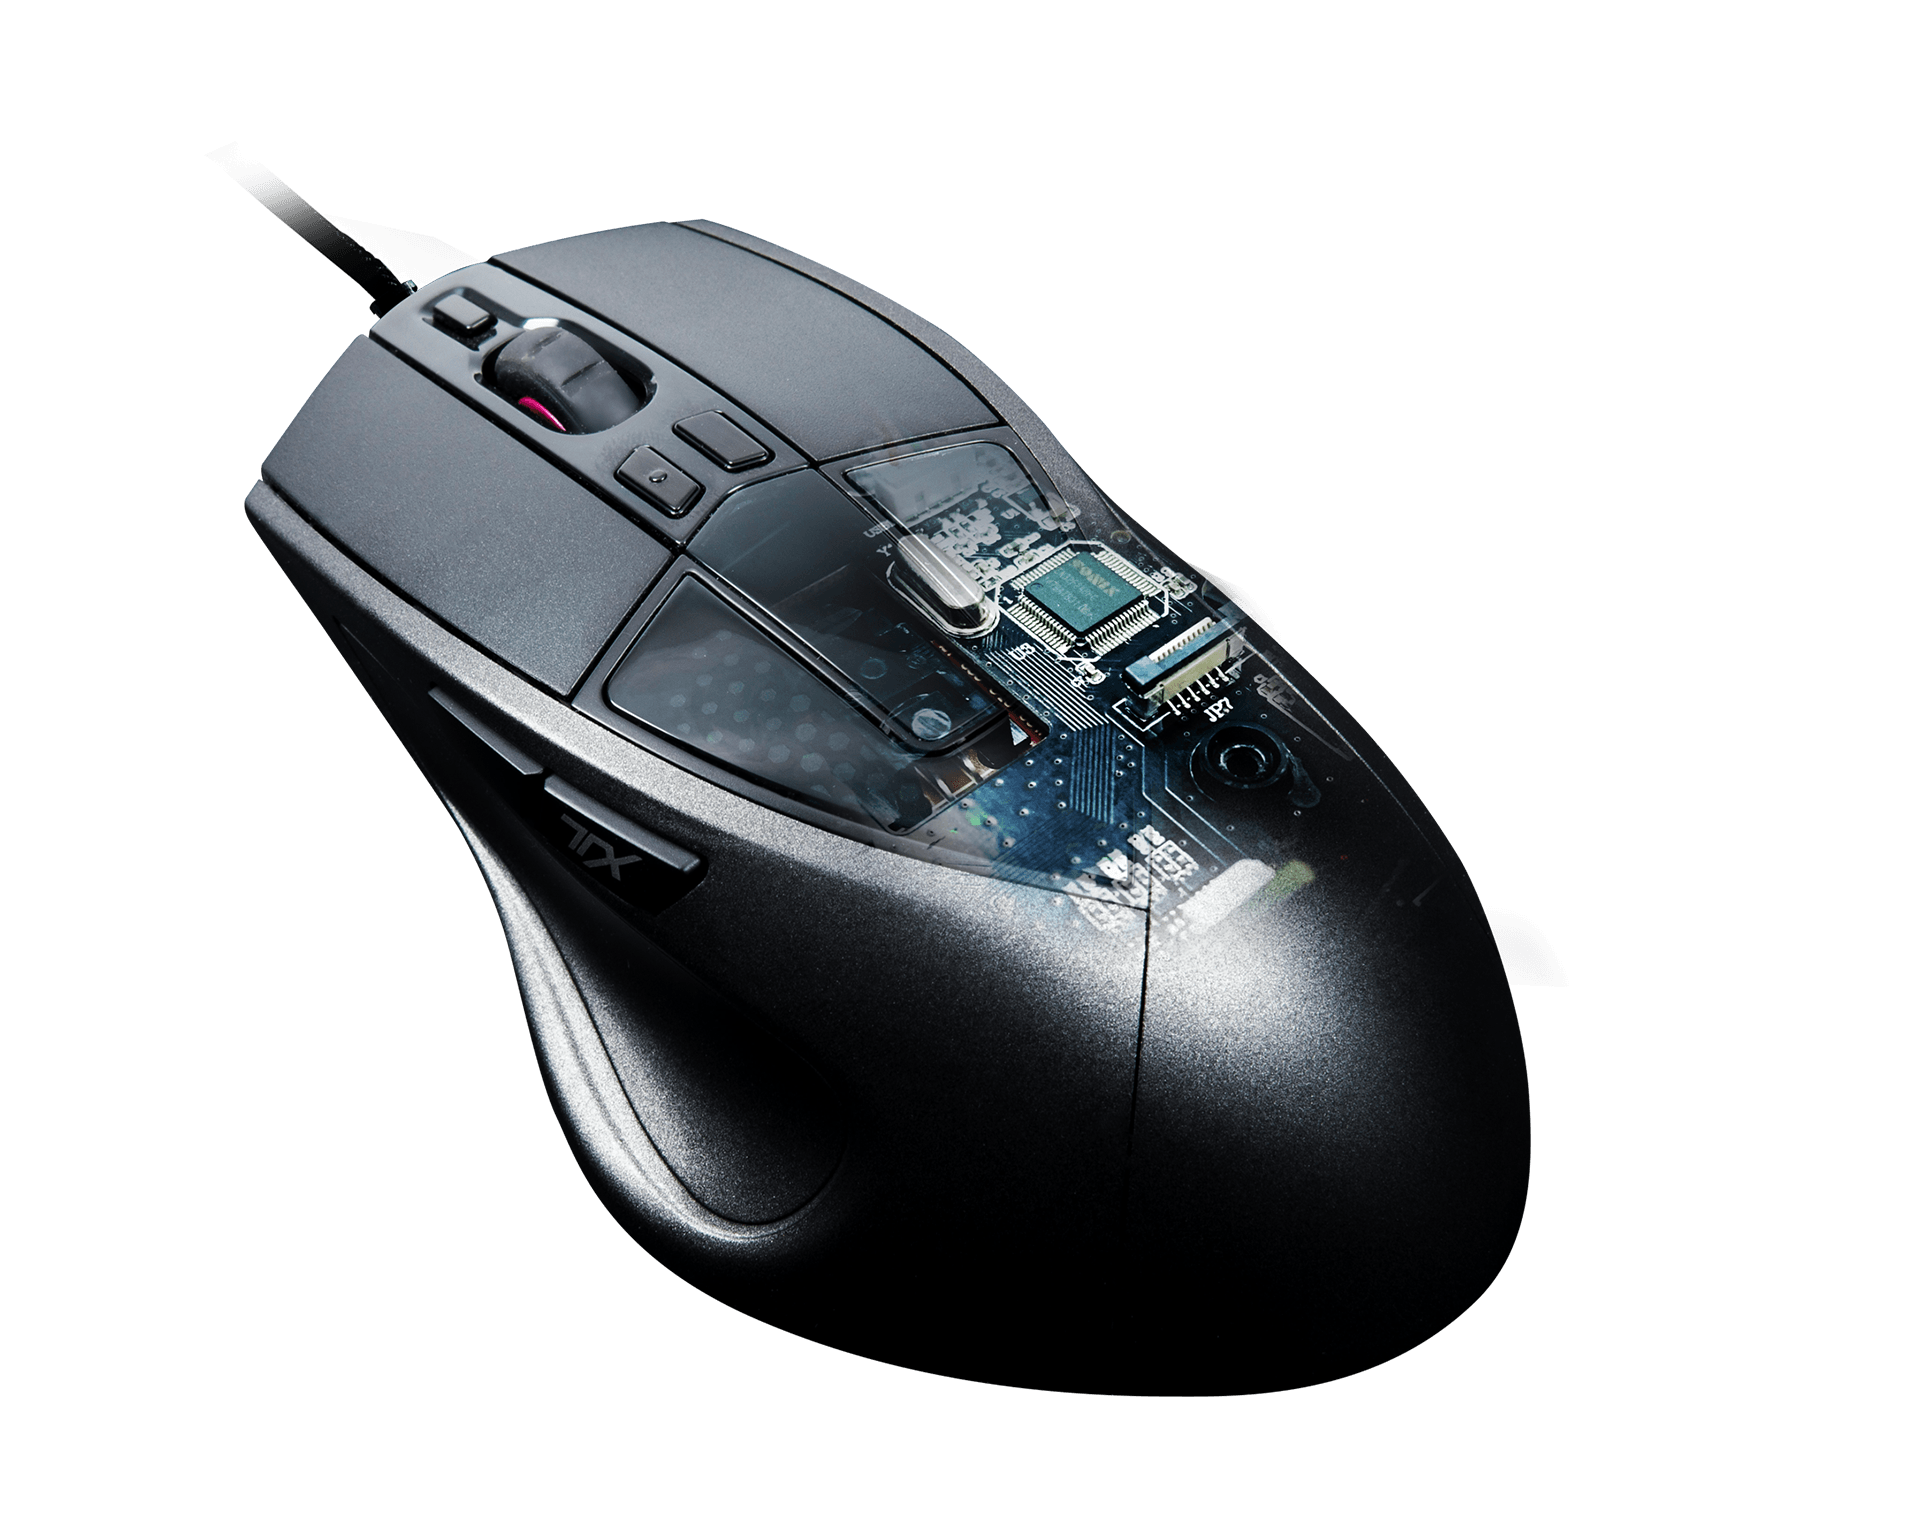 Cooler Master Launches Sentinel III Mouse for Palm Grip FPS Gamers